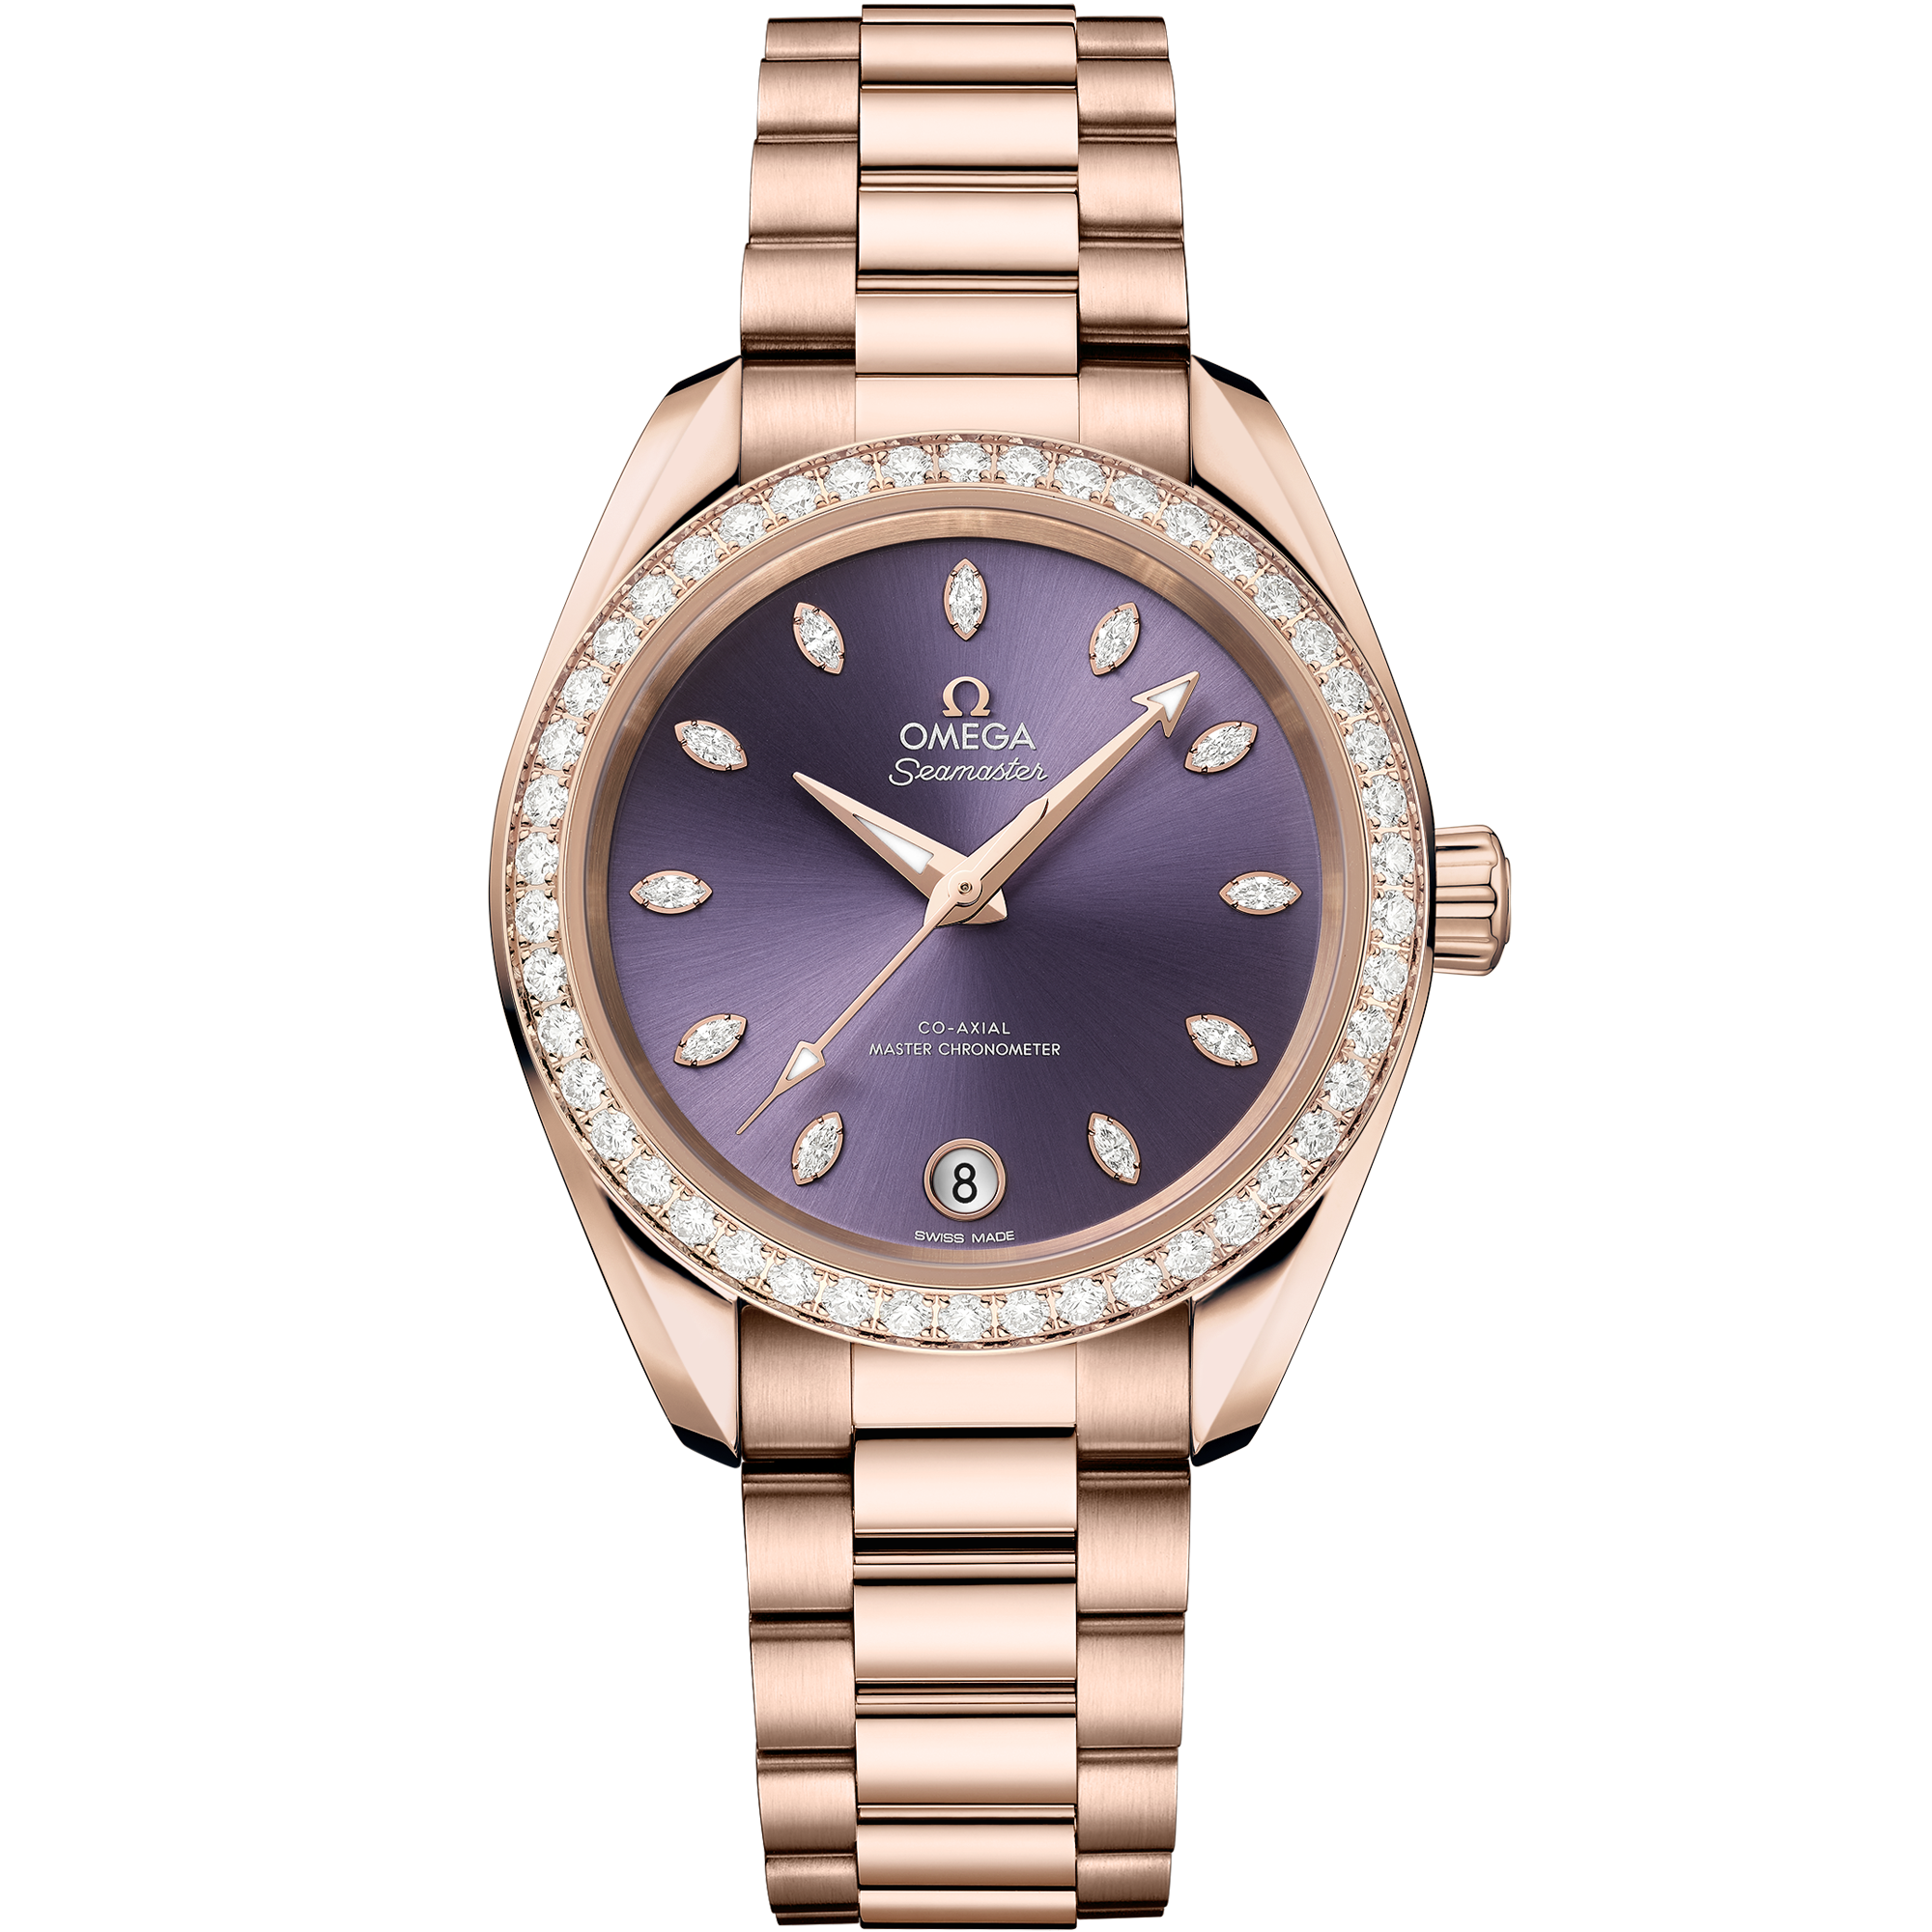 Purple dial watch on Sedna™ gold case with Sedna™ gold bracelet - Seamaster Aqua Terra Shades 34 mm, Sedna™ gold on Sedna™ gold - 220.55.34.20.60.001